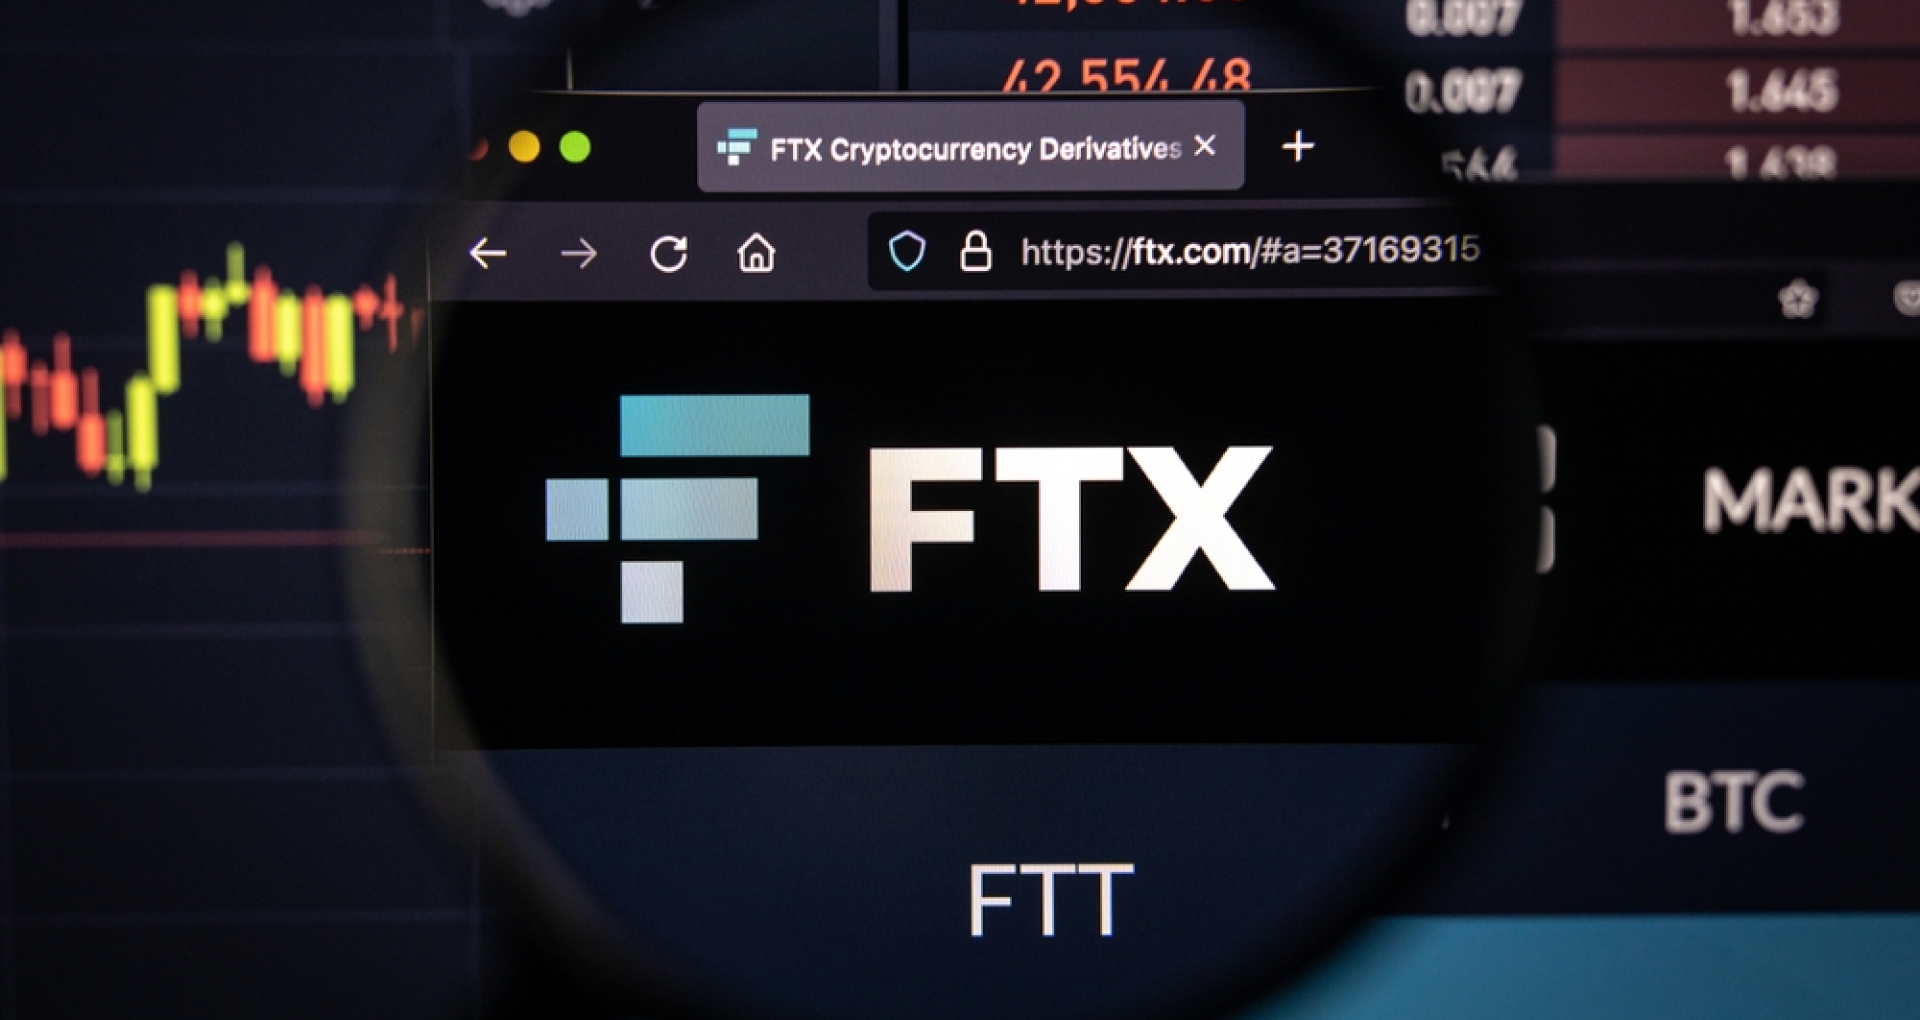 FTX-SBF Debacle: Latest News and Shocking Developments